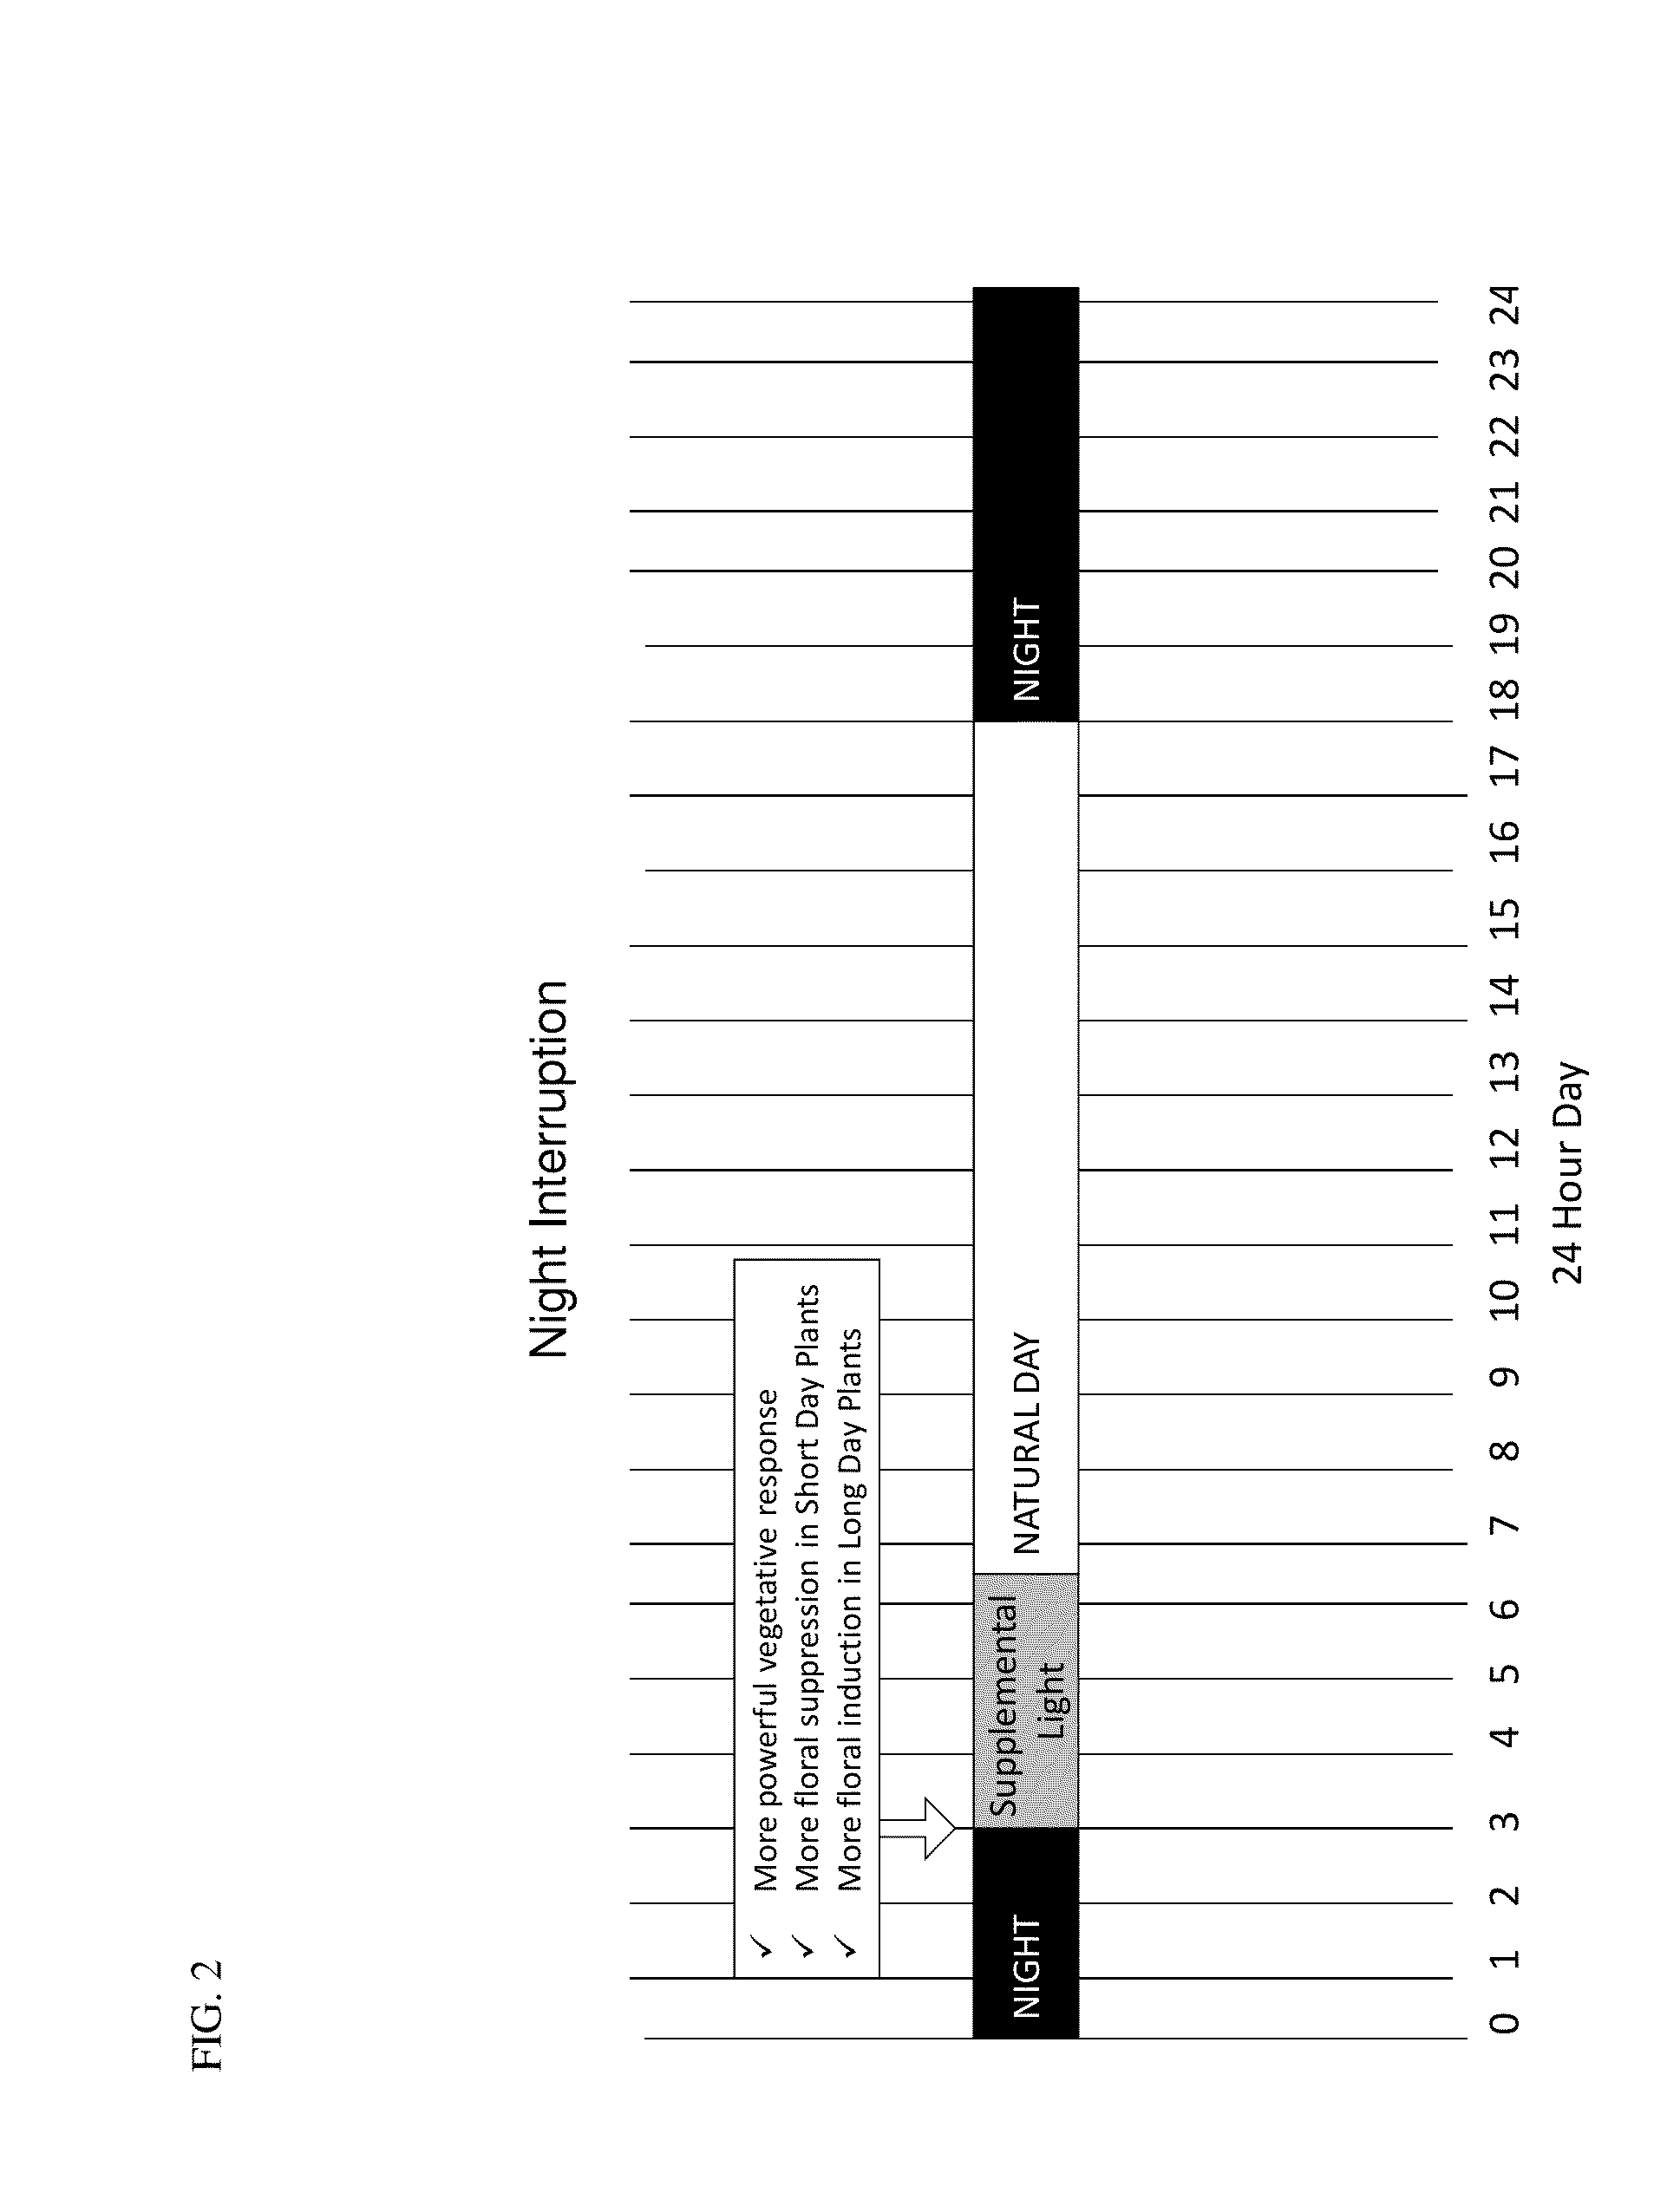 Methods for modifying flowering time and seed yield in field crops